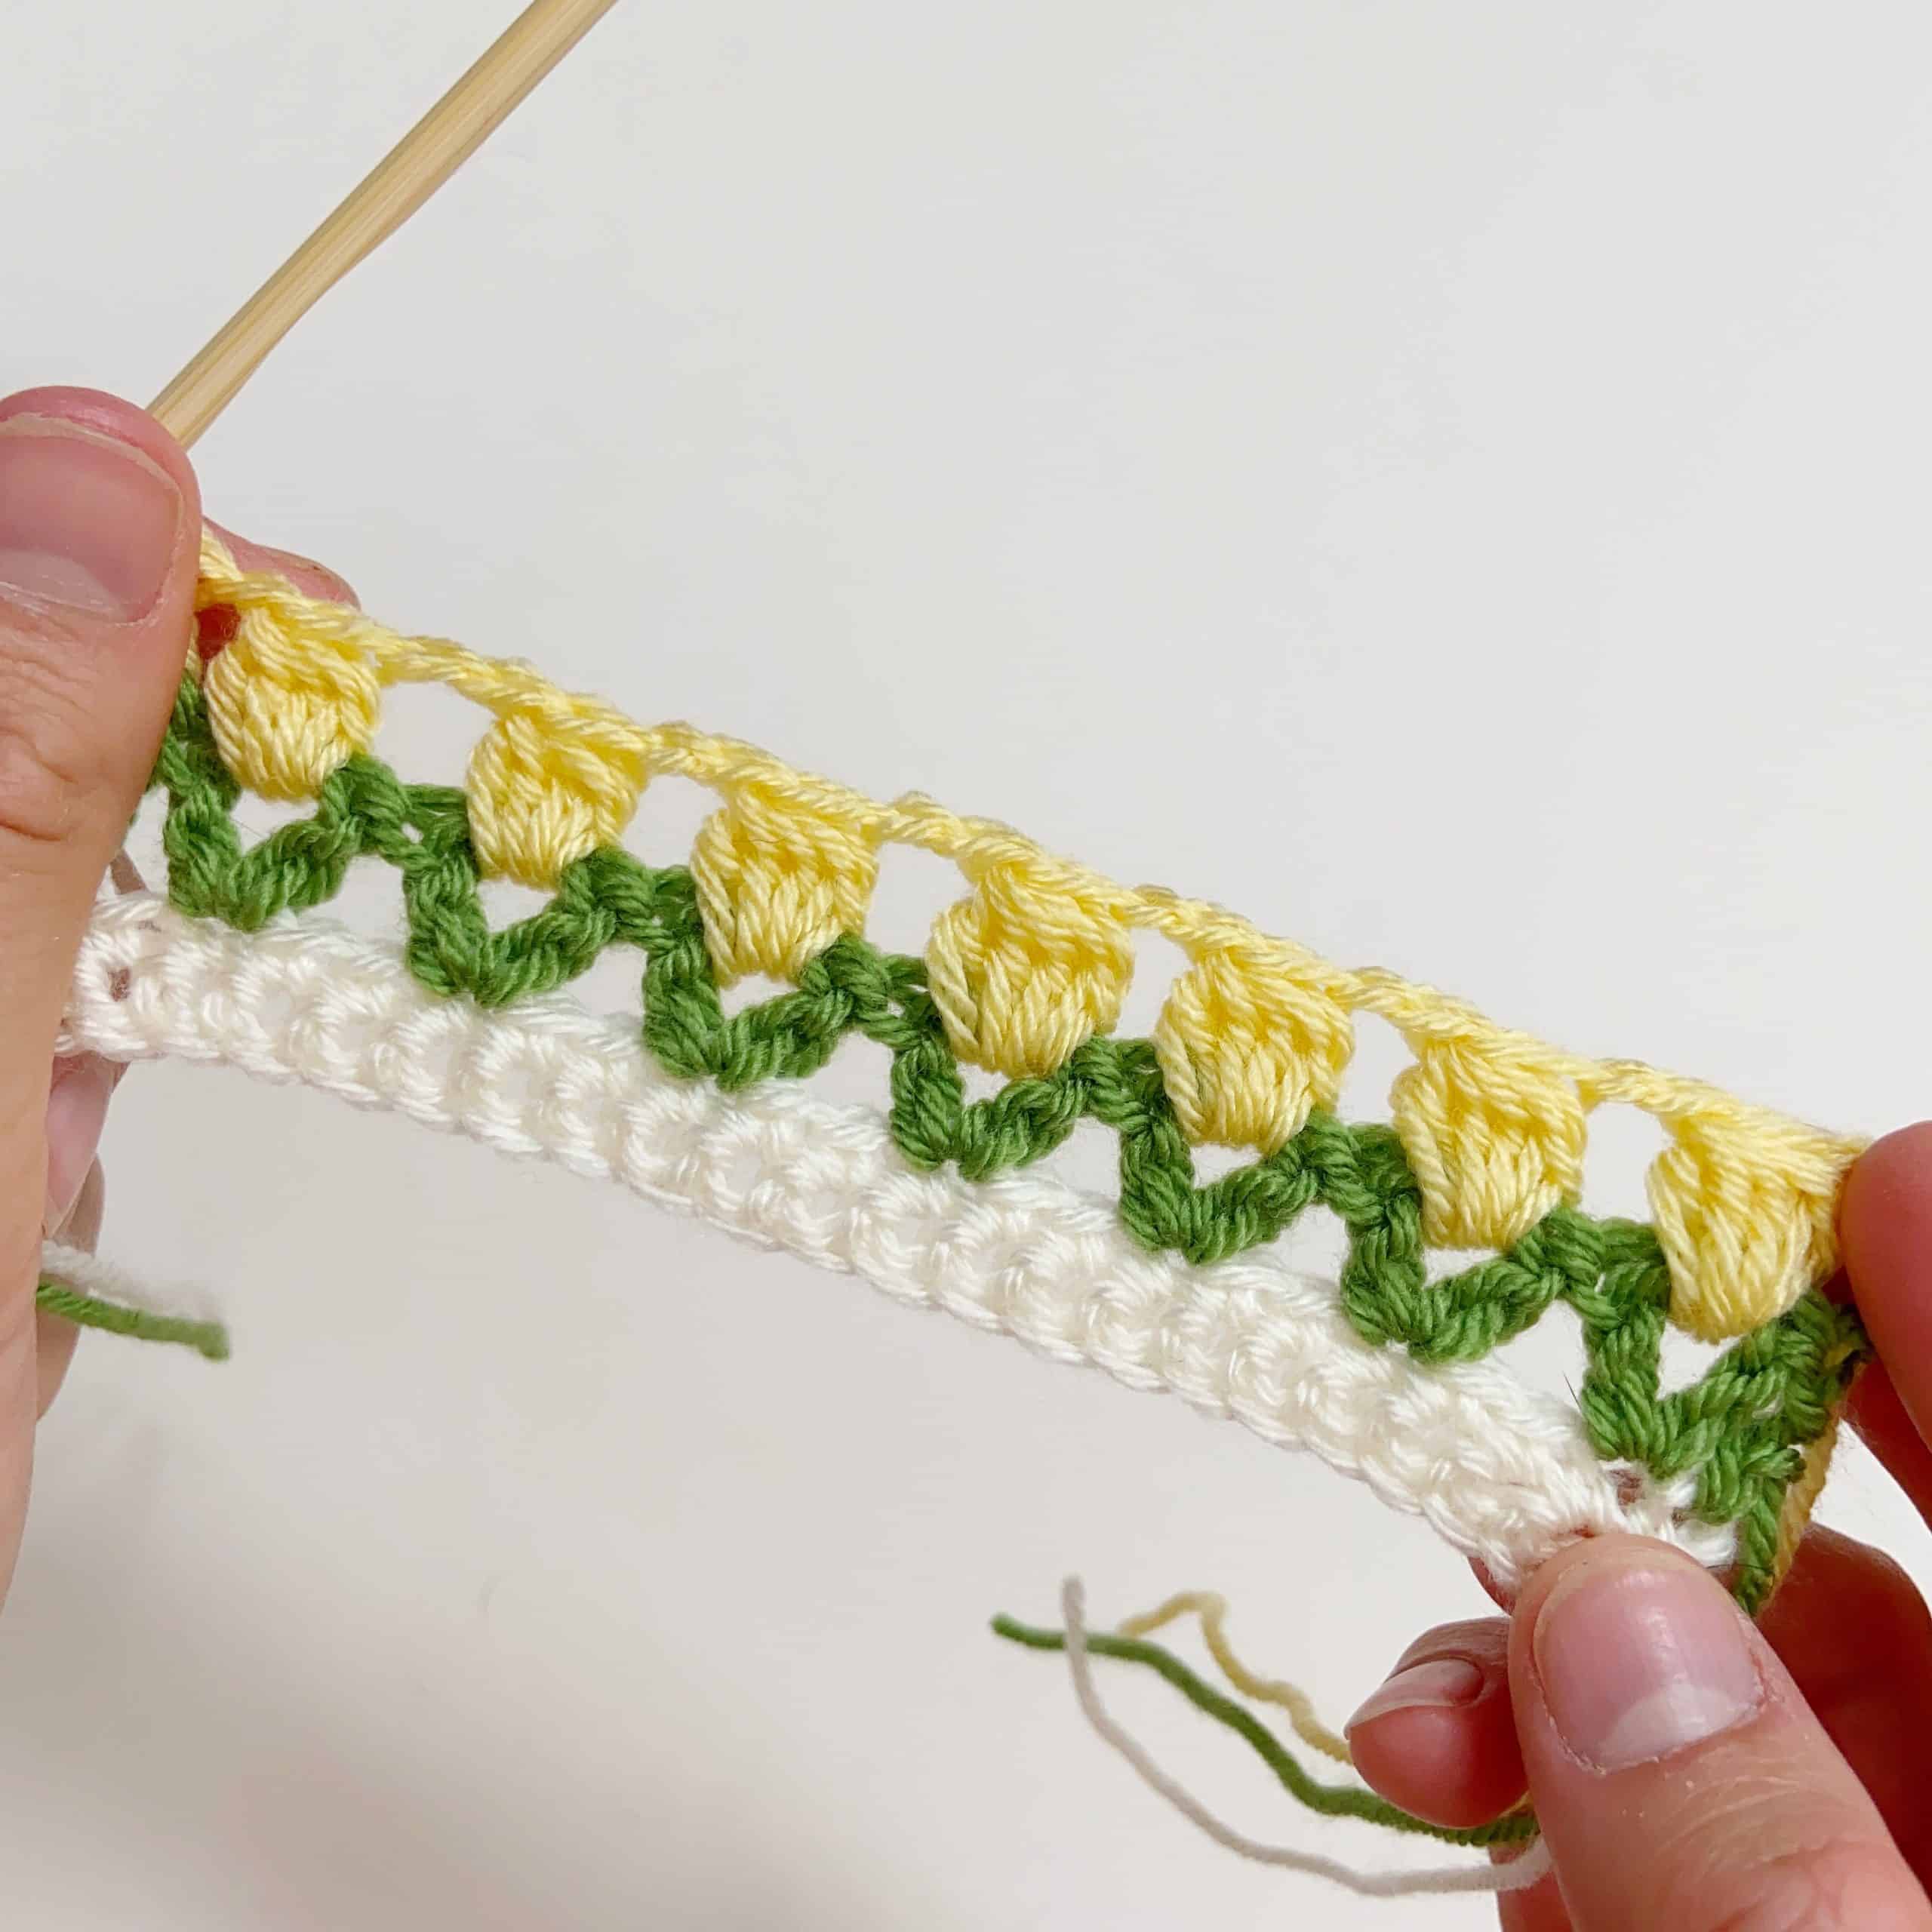 row of crochet cluster stitches